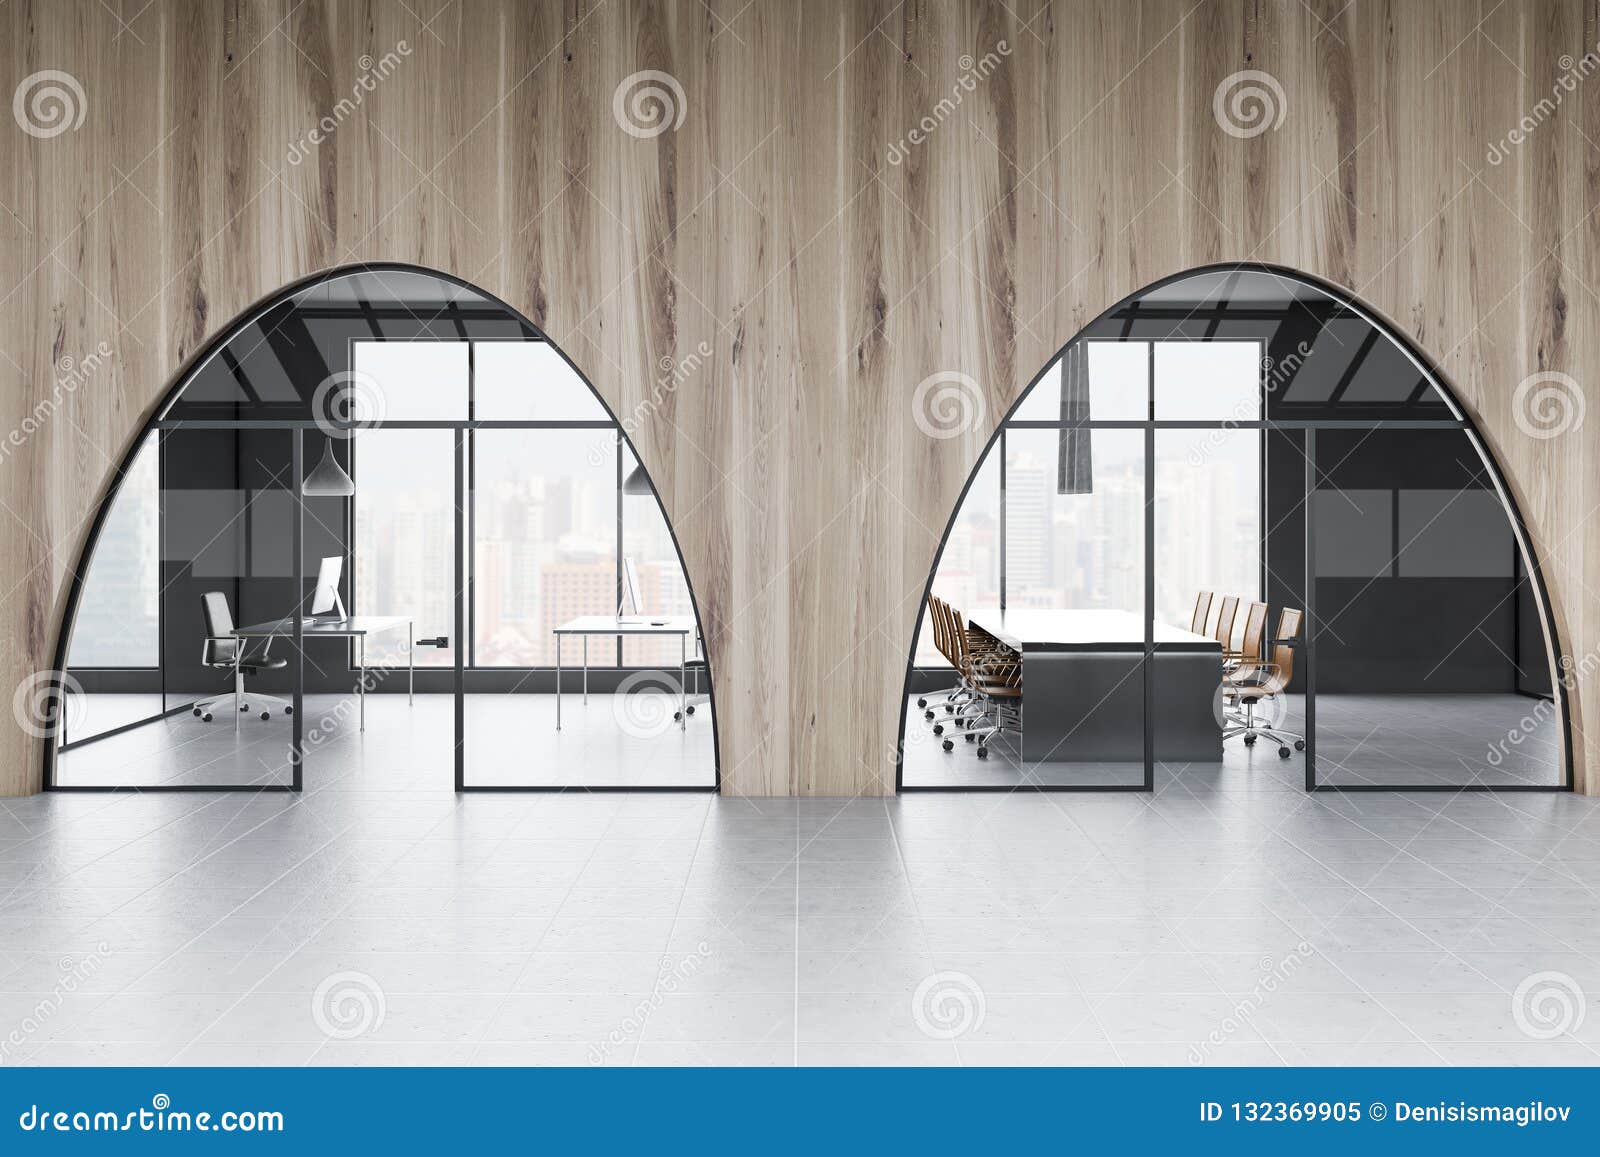 Wooden Office And Meeting Room Stock Illustration